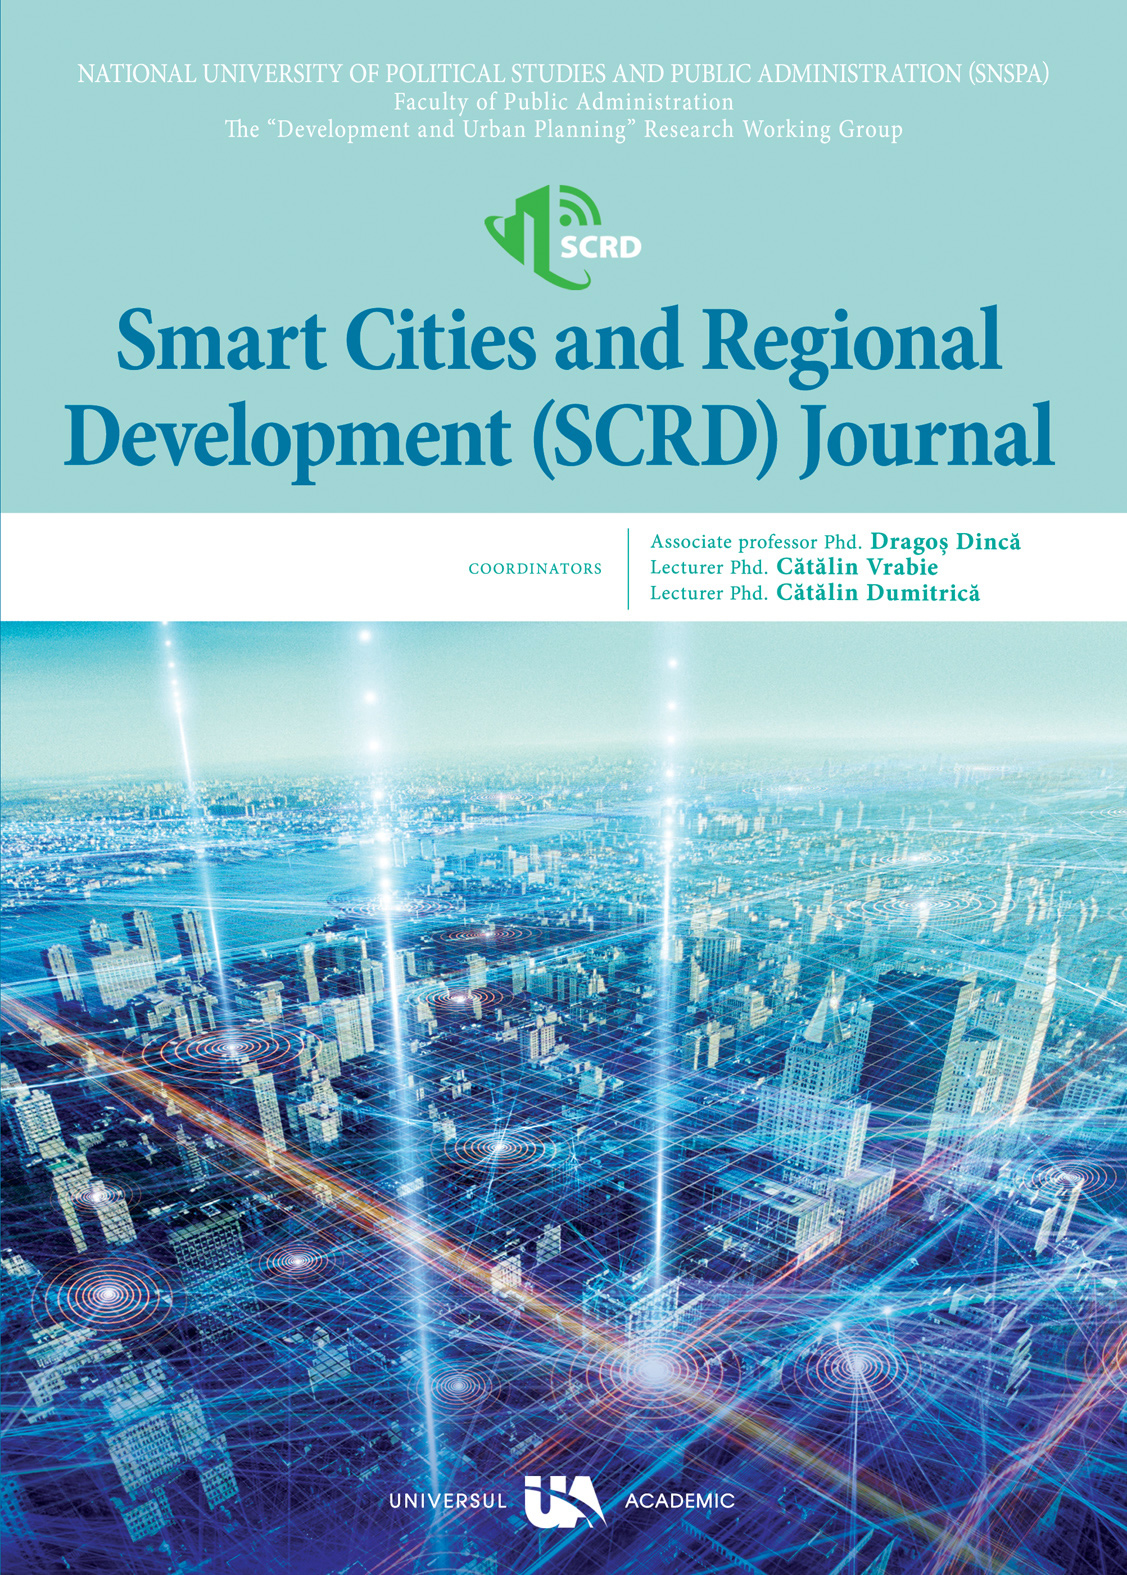 An IoT system for healthcare in the smart city Cover Image